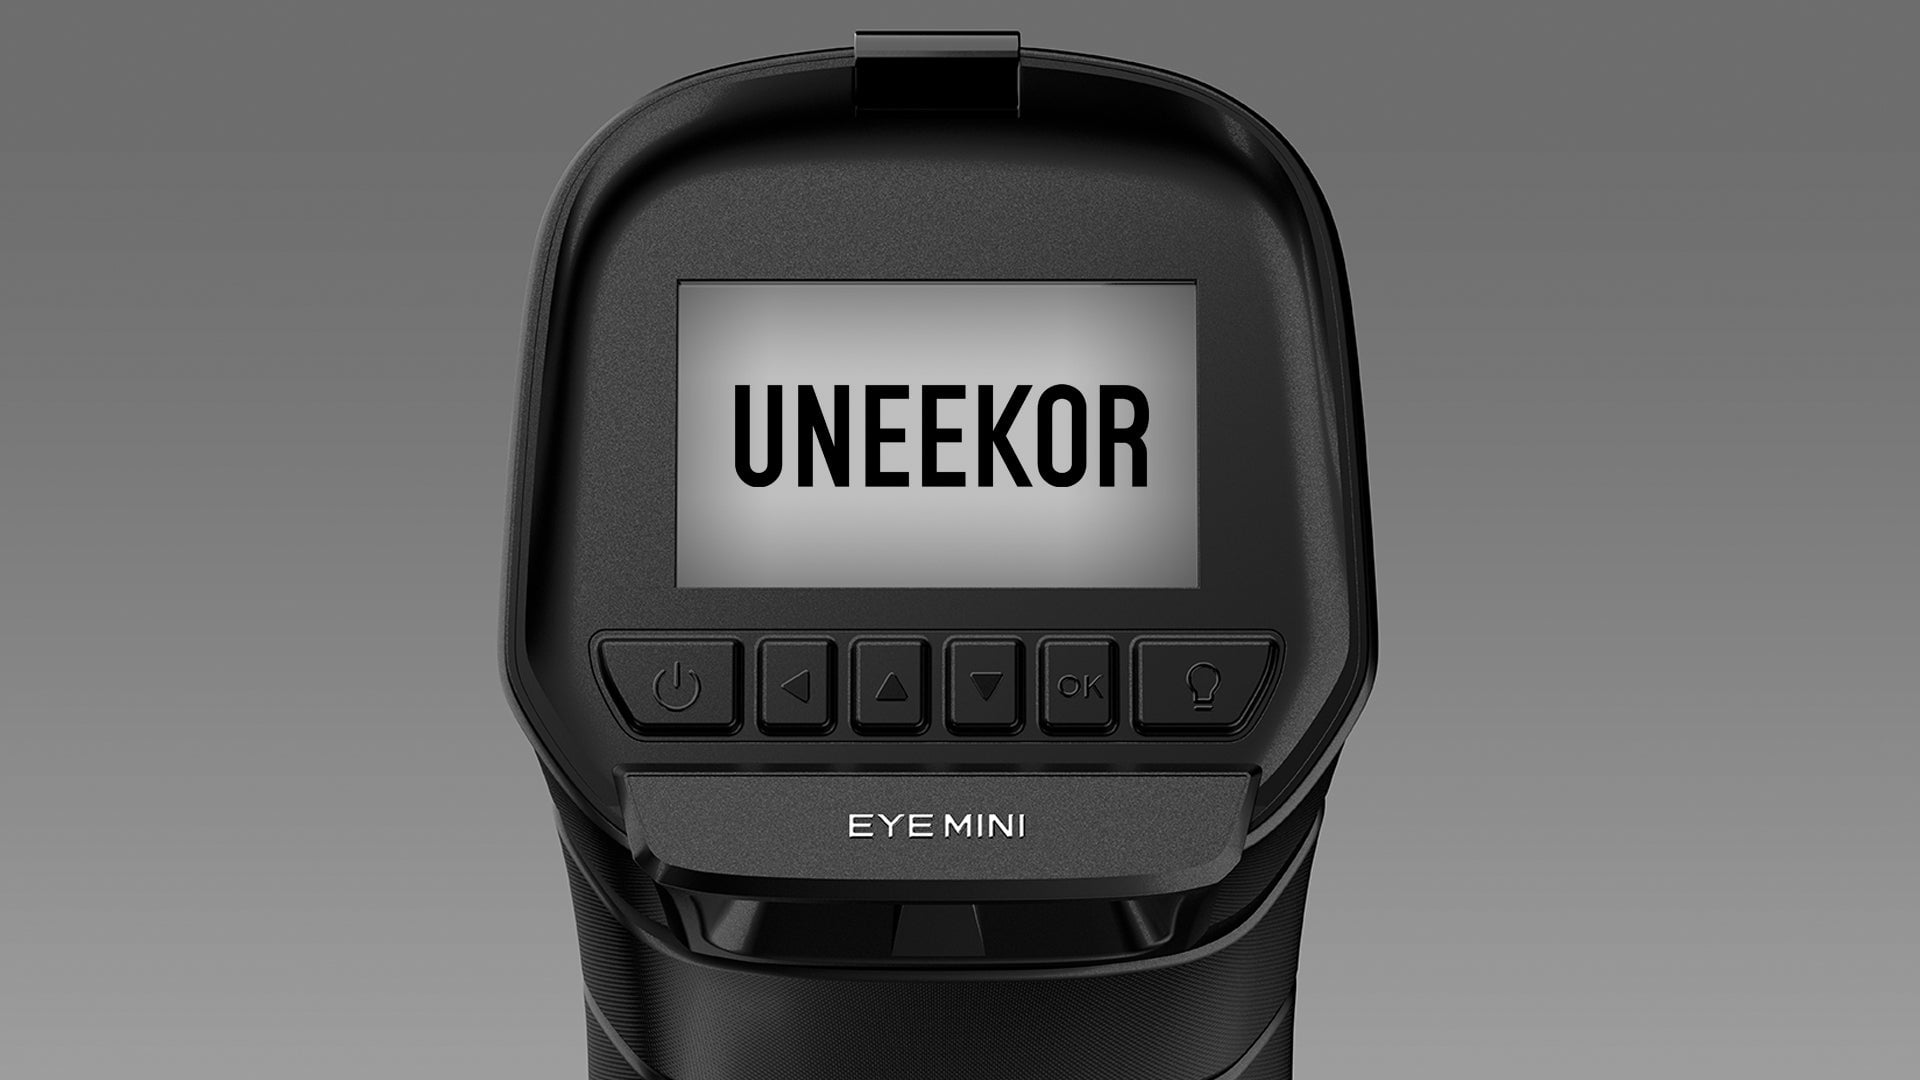 First Look At The Uneekor EYE MINI